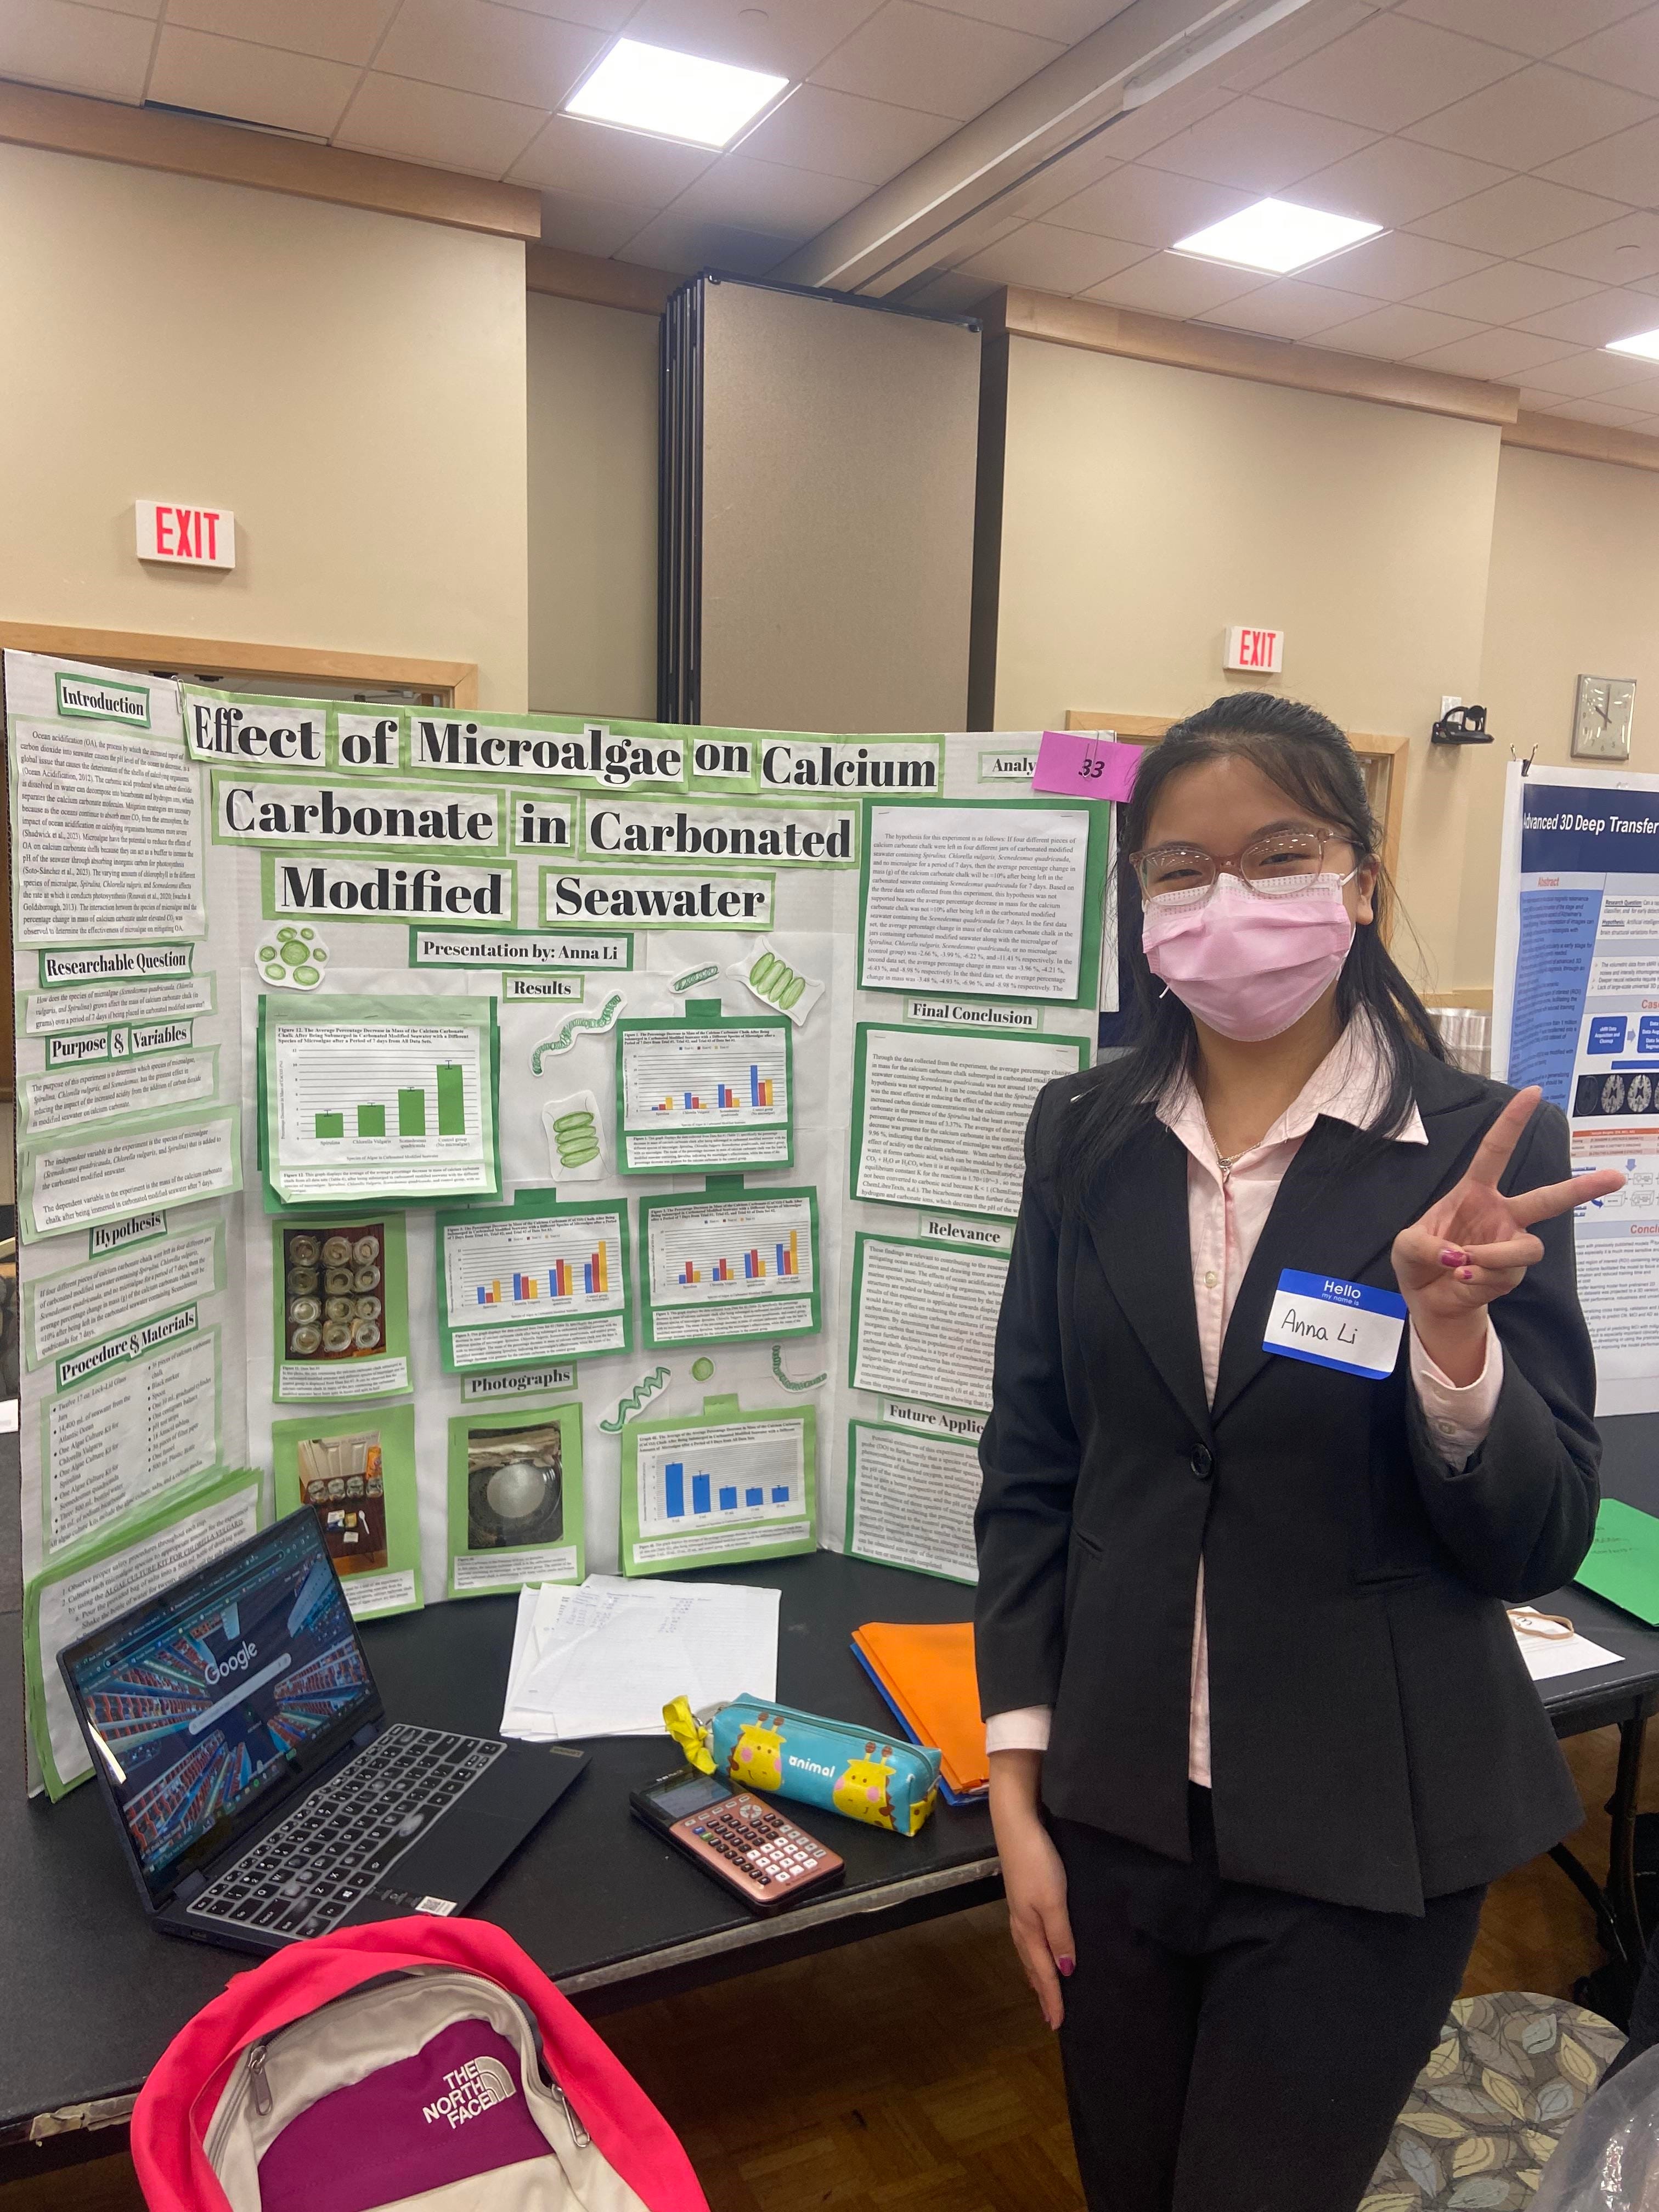 Second-year student from North Quincy High School is awarded top prize at regional science fair